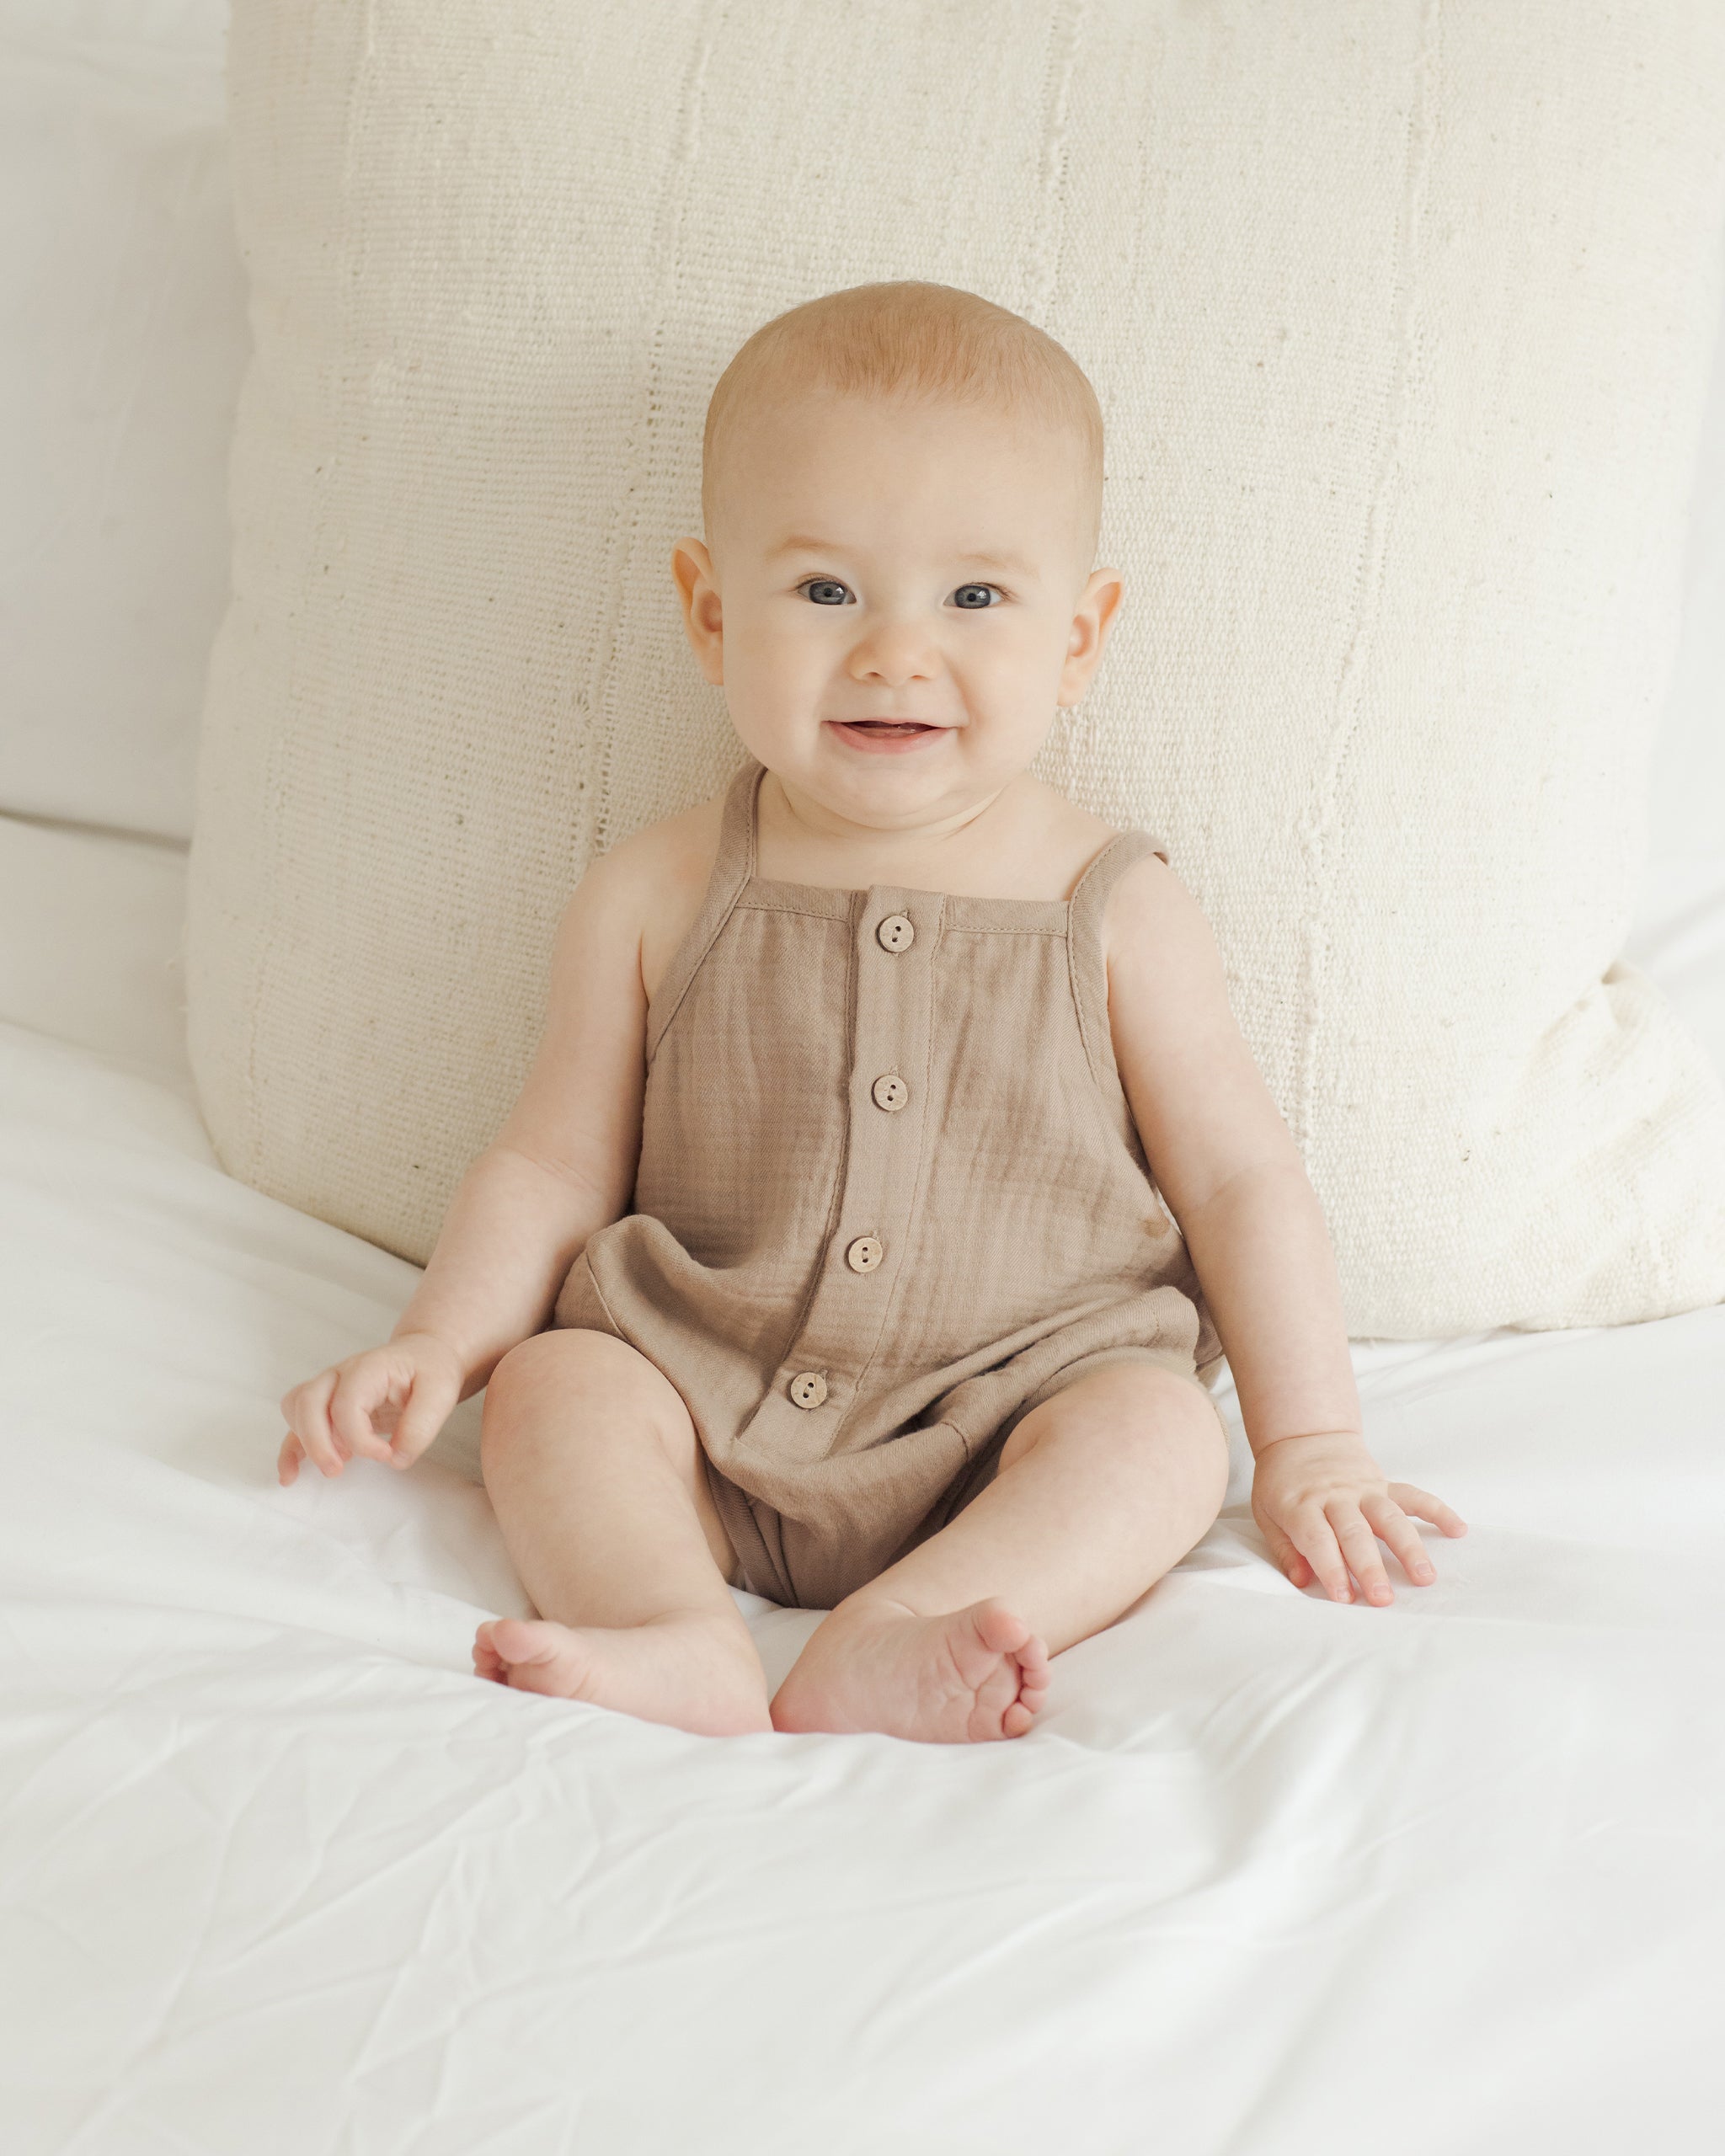 Oakley Romper || Oat - Rylee + Cru | Kids Clothes | Trendy Baby Clothes | Modern Infant Outfits |